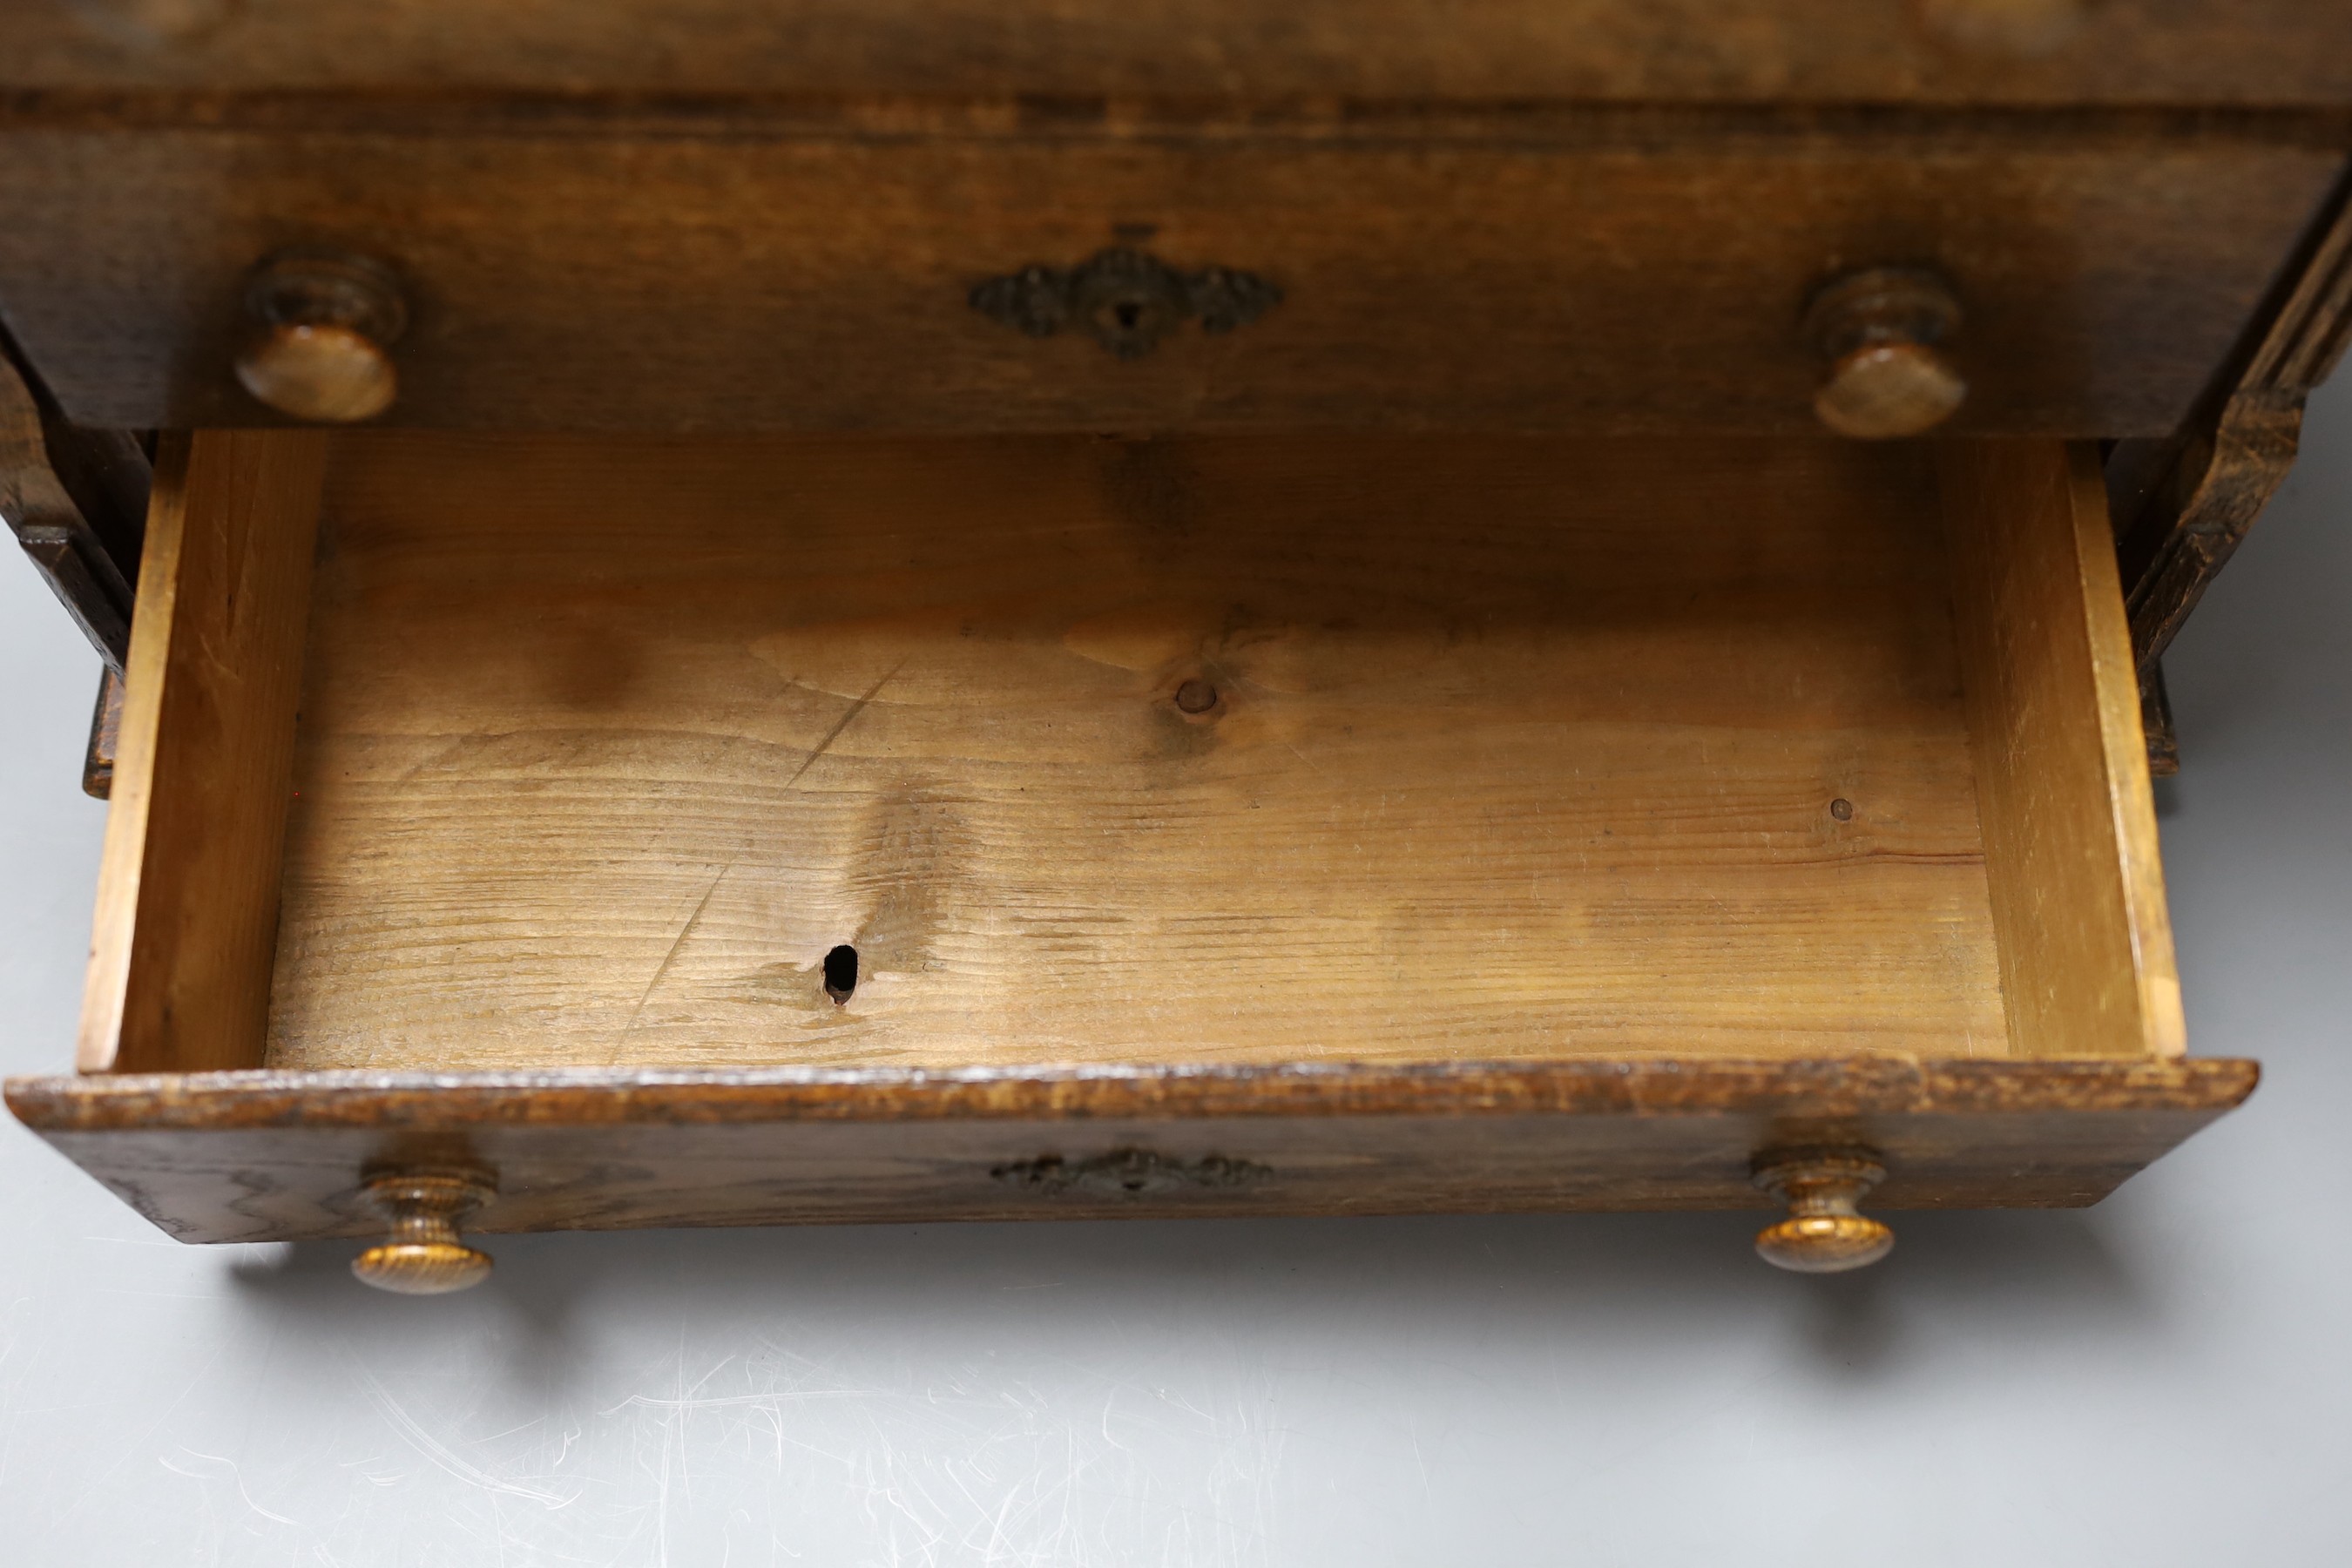 An oak table top chest of three drawers, 39.5cm wide